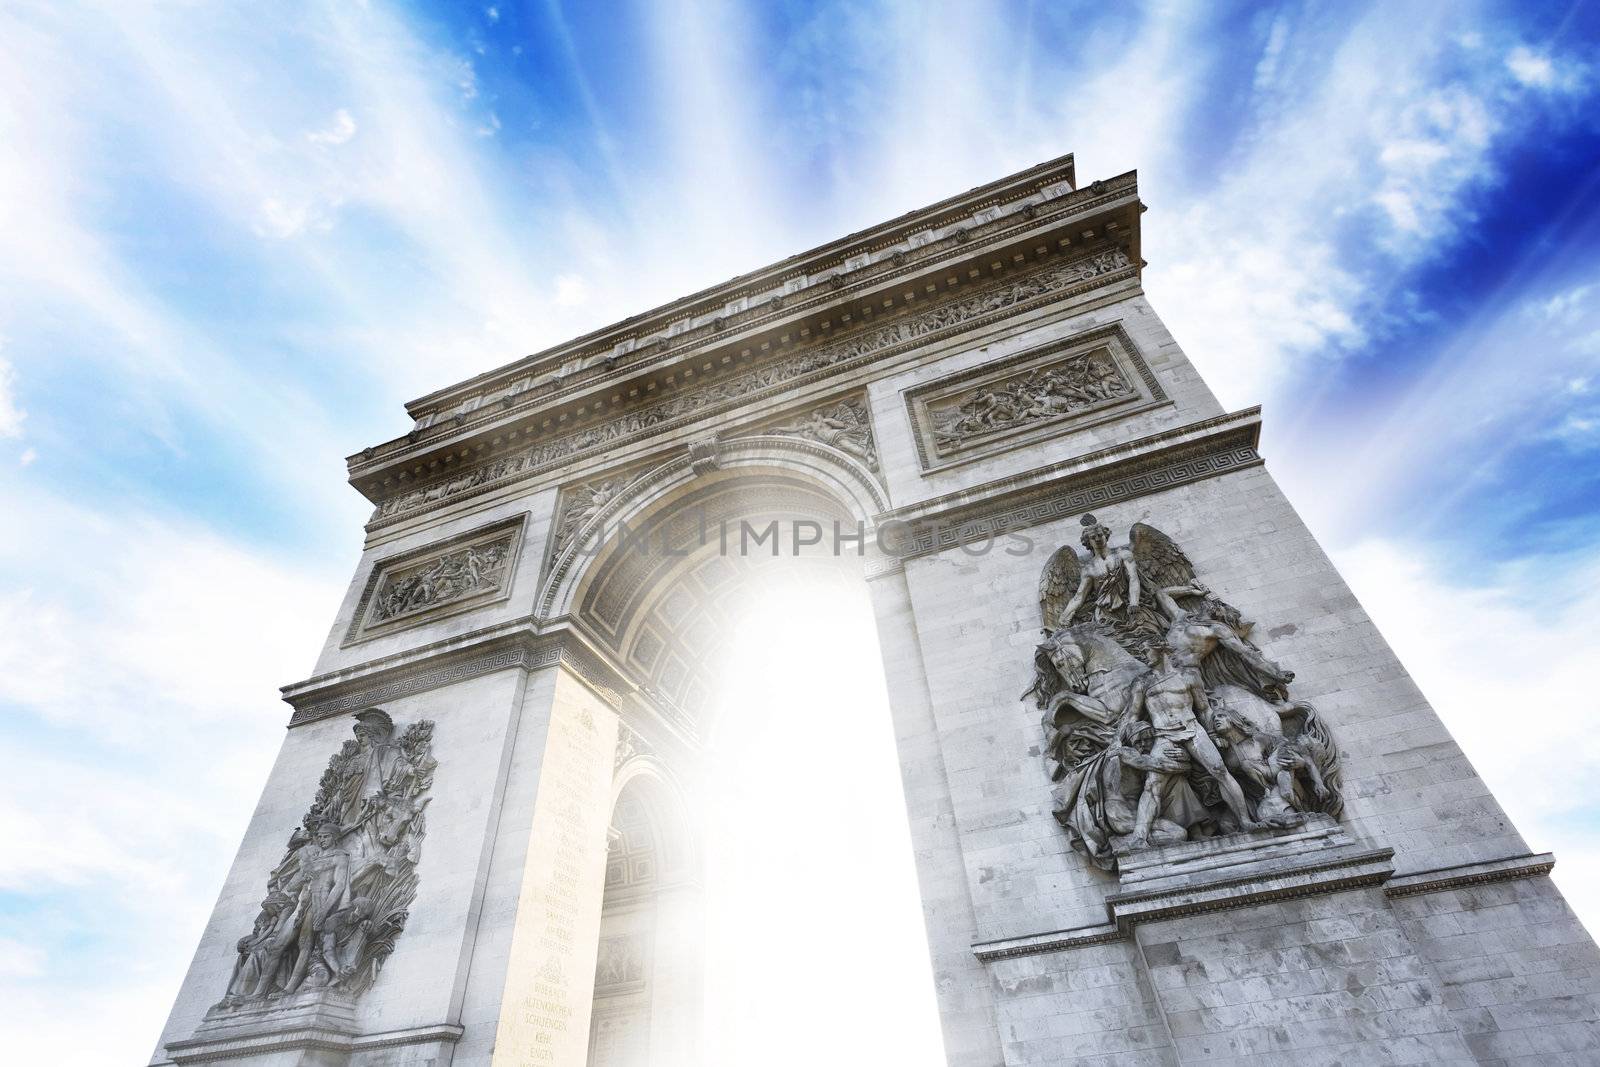 Photo of the Arc de Triomphe historical building in Paris flaring up with beautiful bright lights on a colorful cloudy sky background. Conceptual.